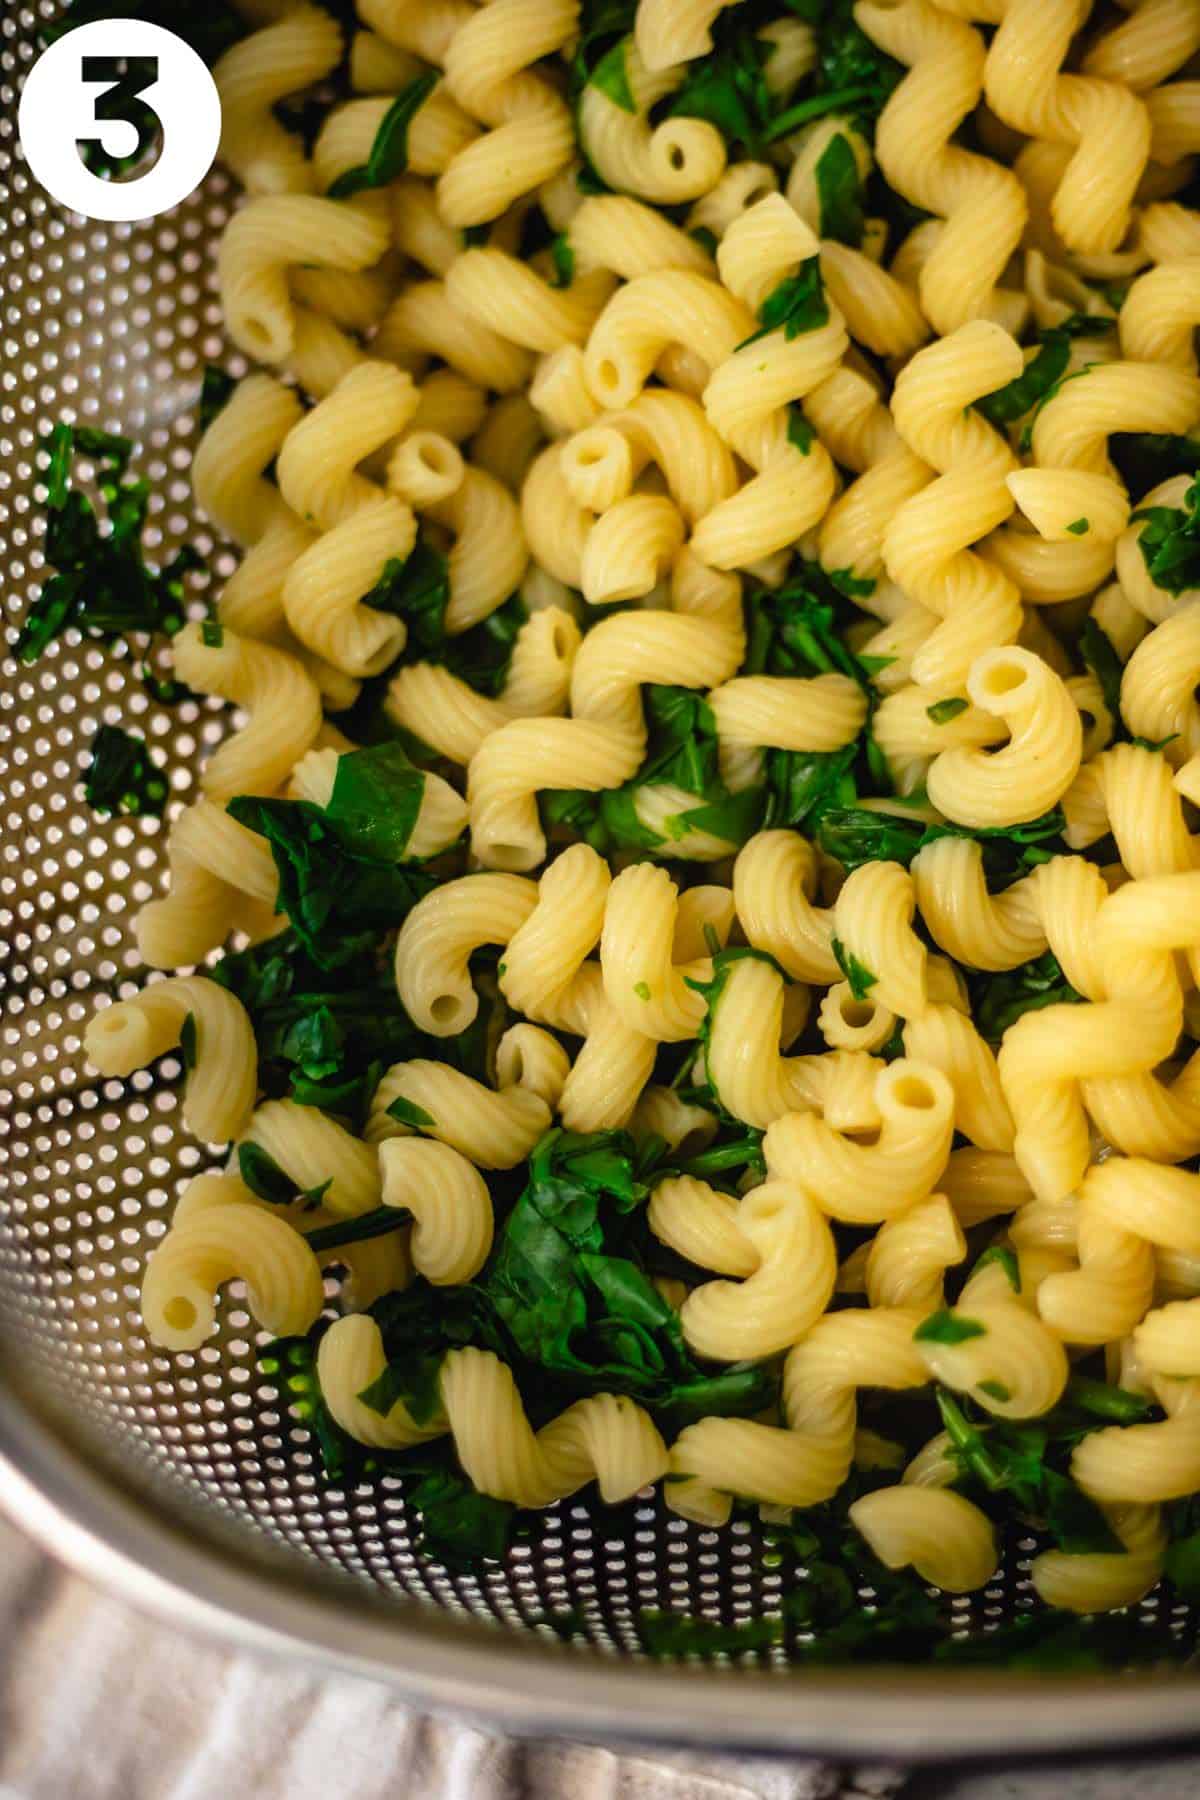 Step 3 is shown draining the pasta and spinach in a colander. The photo is labeled with a "3" in the upper left corner.